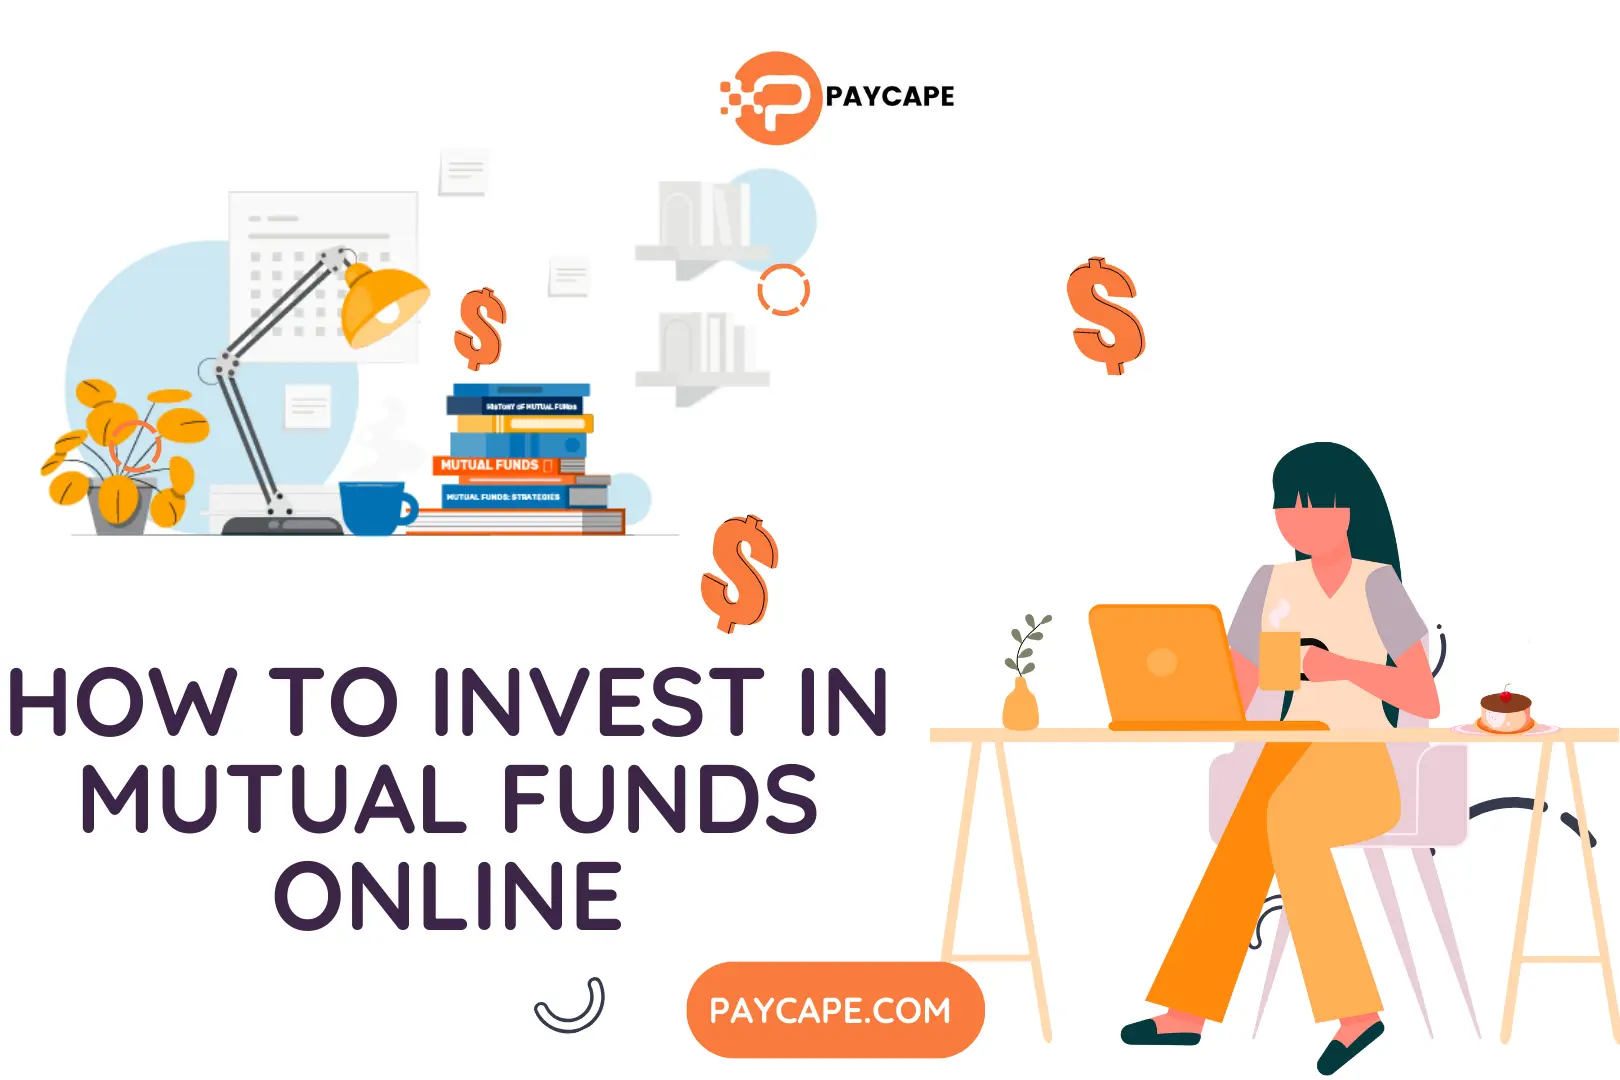 How to Invest in Mutual Funds Online